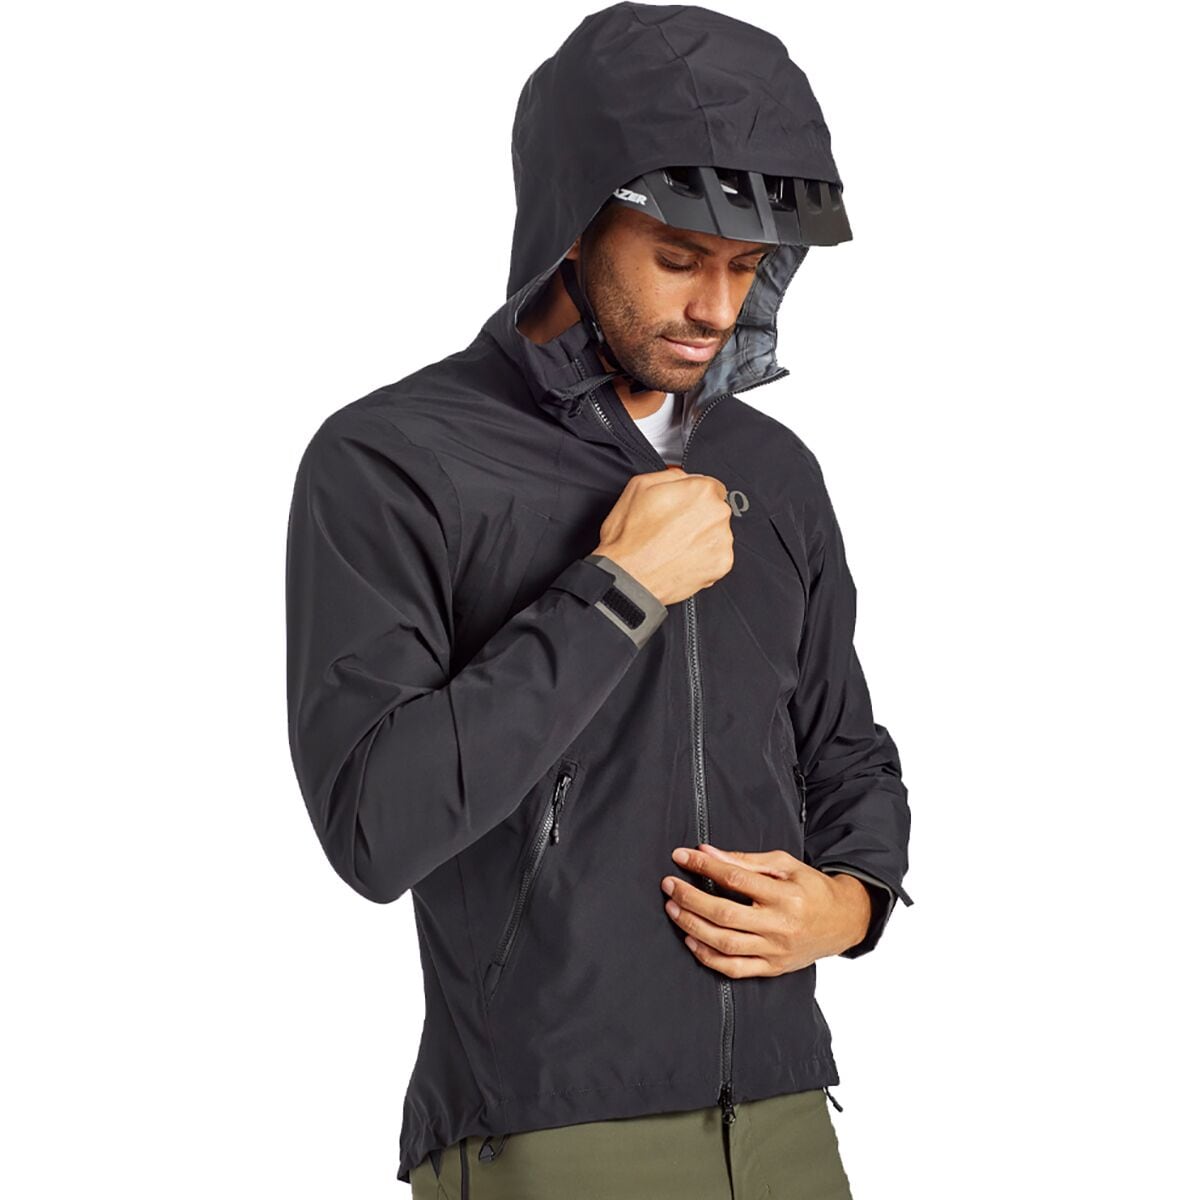 Reliable Rainwear H2O Rodeo Suit 2203 | Dual Coloured Raincoat For Men  Waterproof | Rain Jacket For Bike Rides | High Neck Collar & Attached Hood  | (M, Black) : Amazon.in: Clothing & Accessories